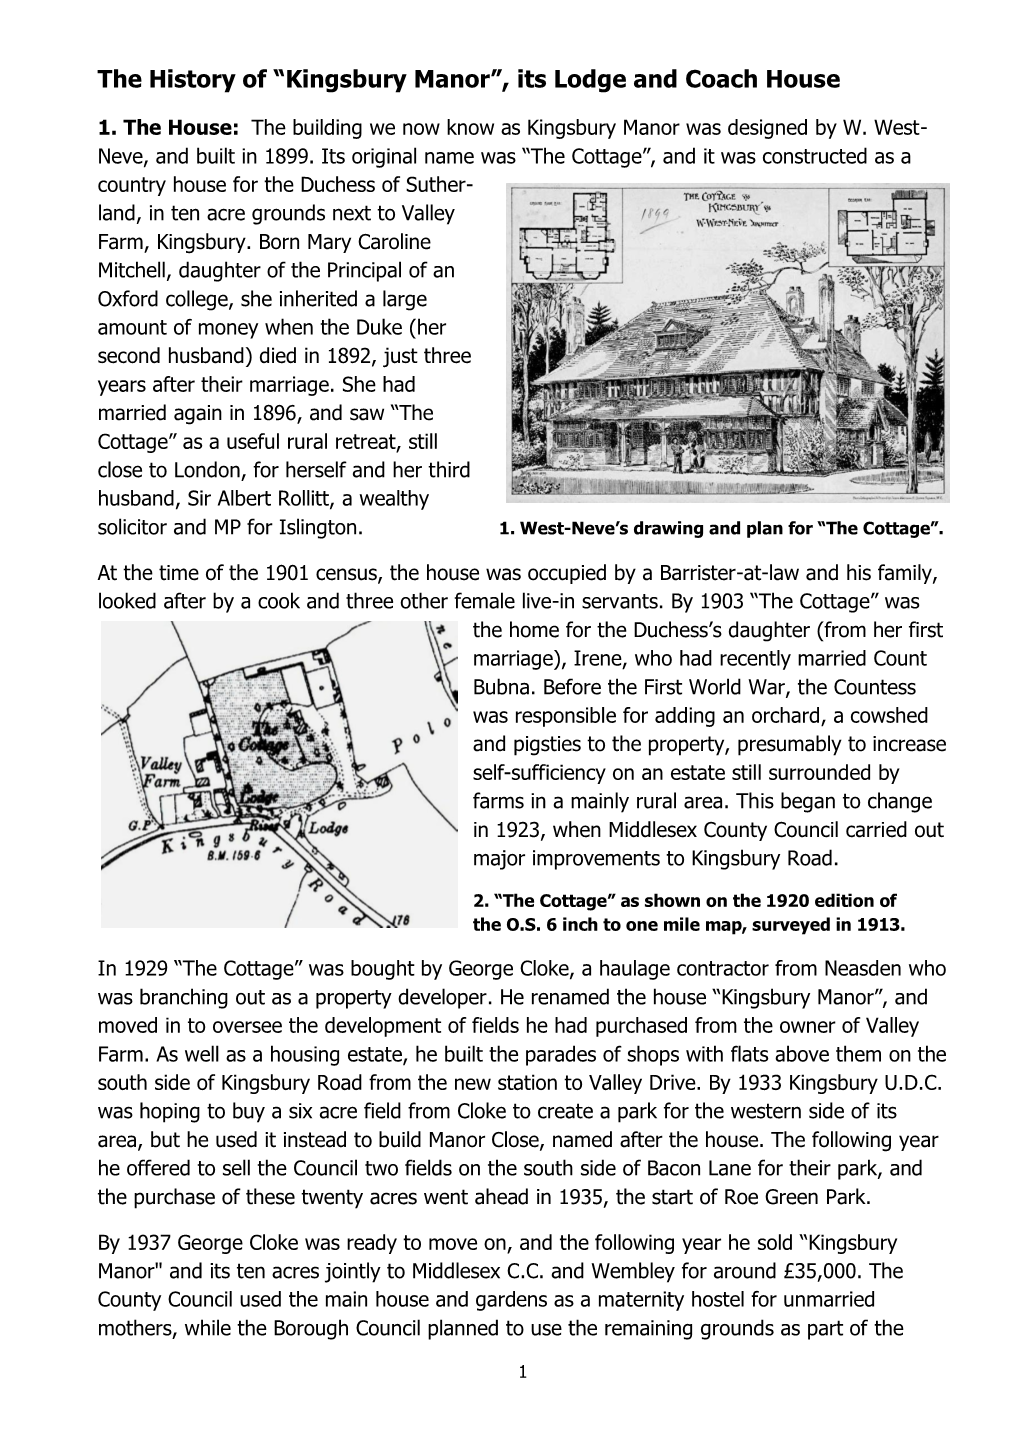 The History of “Kingsbury Manor”, Its Lodge and Coach House